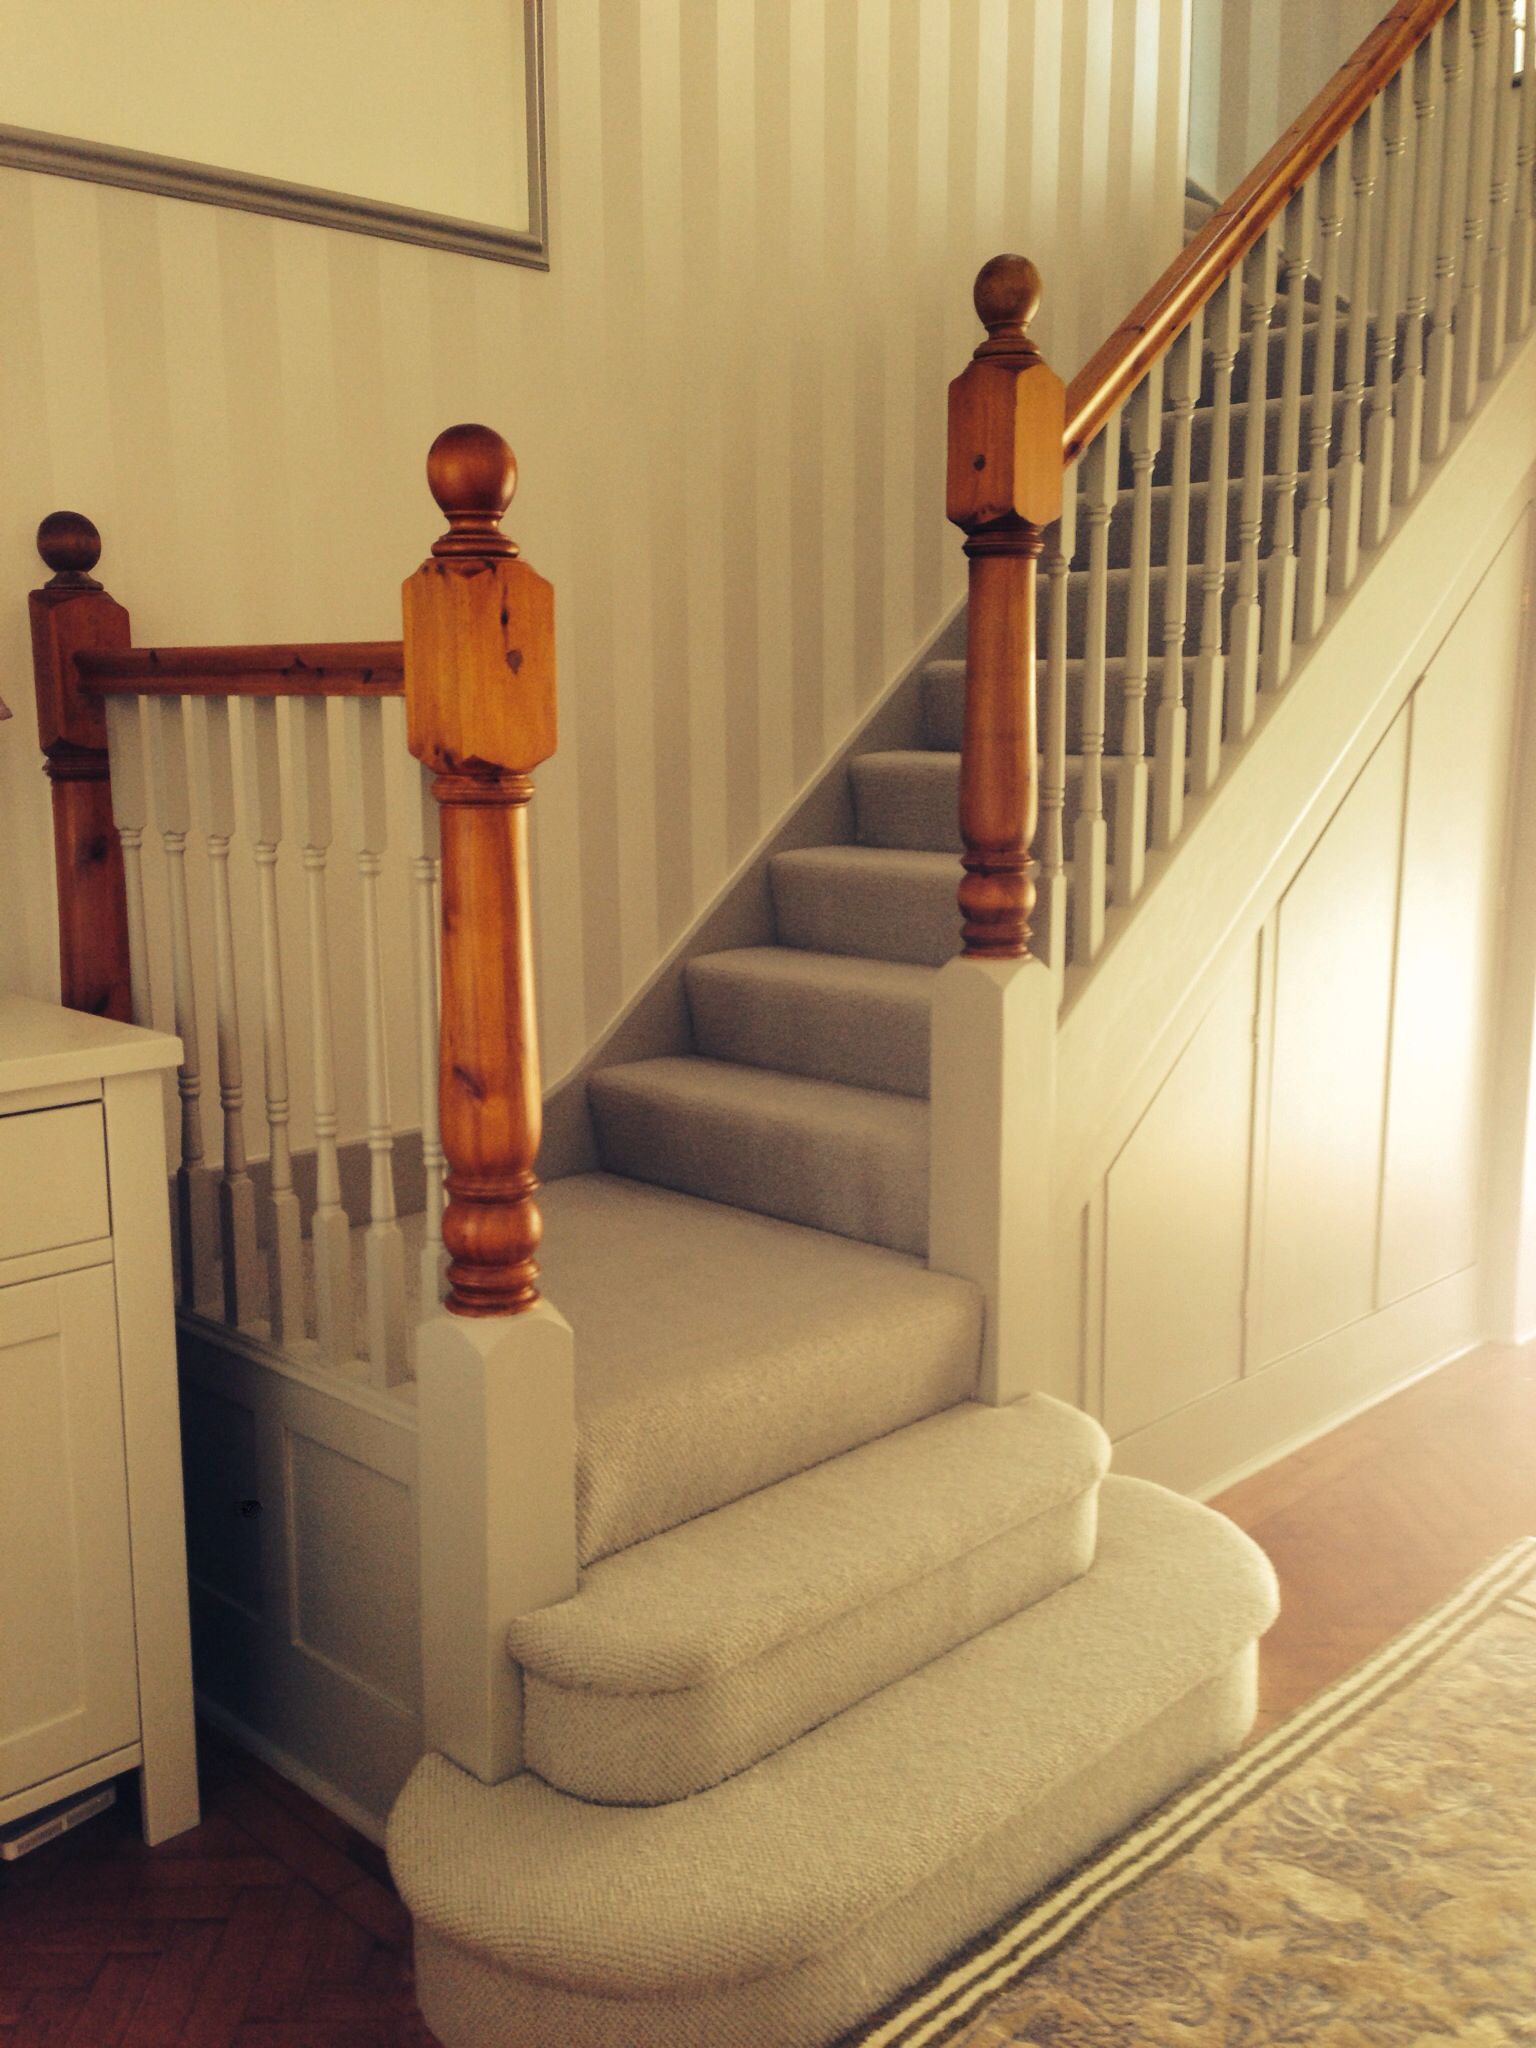 grey hallway wallpaper,stairs,product,handrail,baluster,room